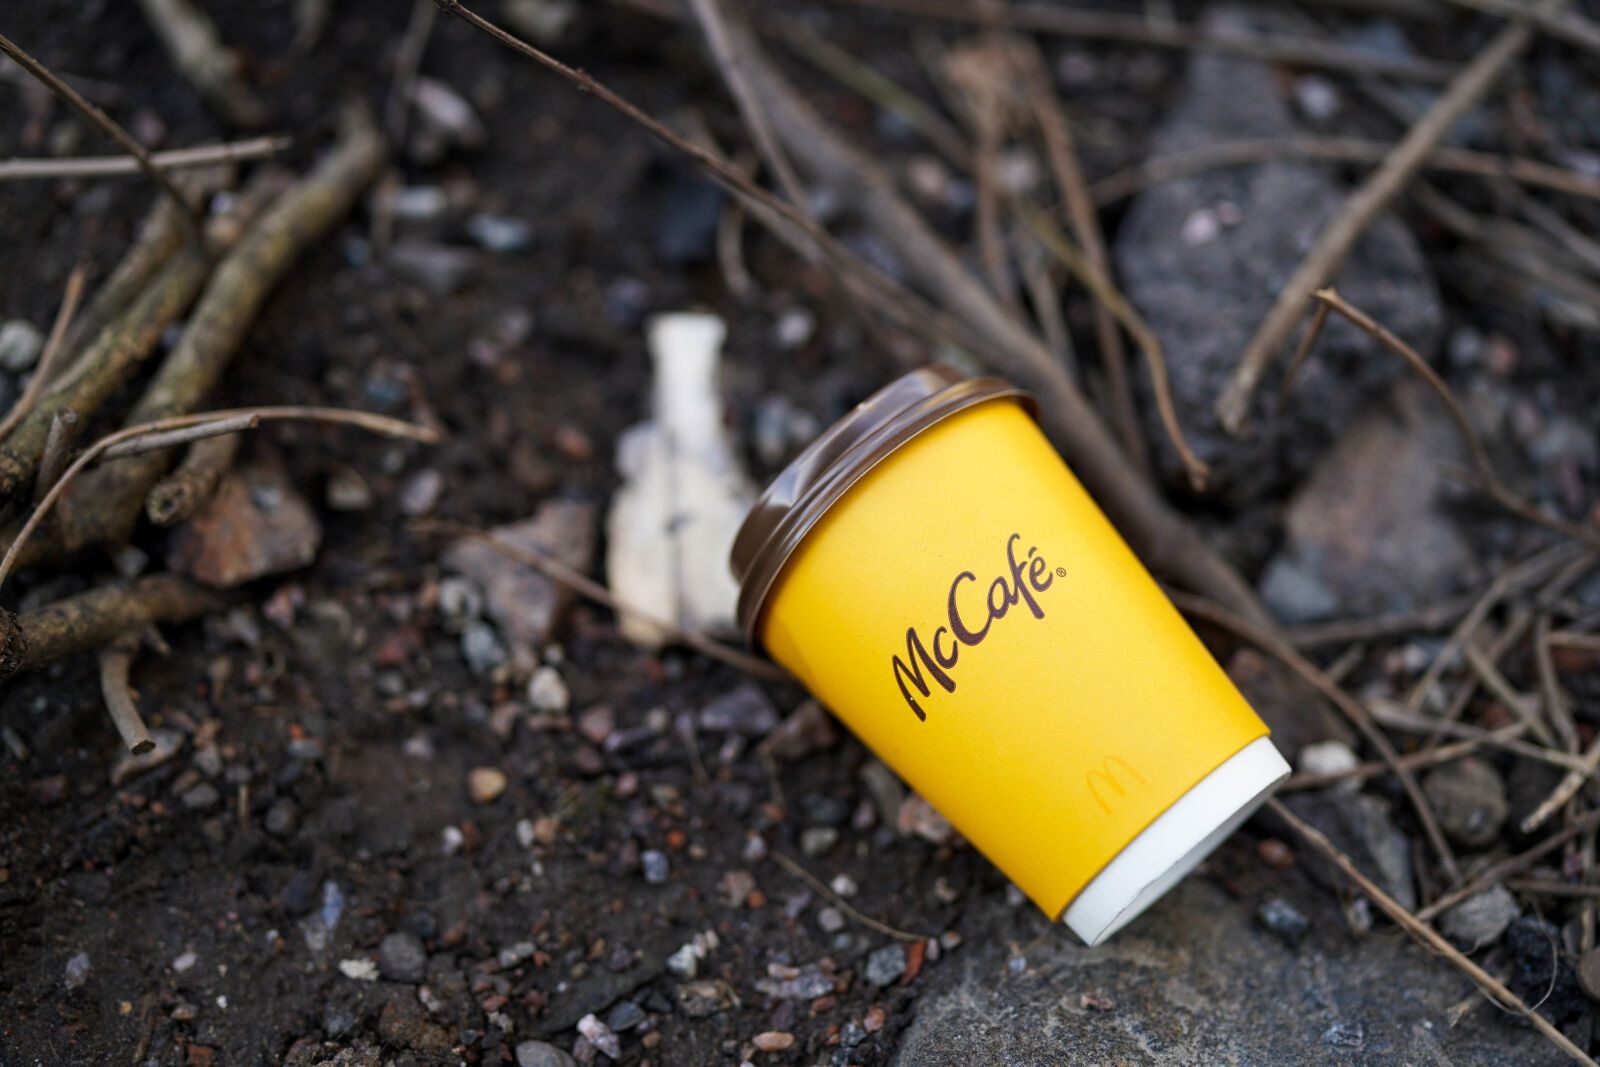 Sony a7R IV sample photo. Littering mccafe photography